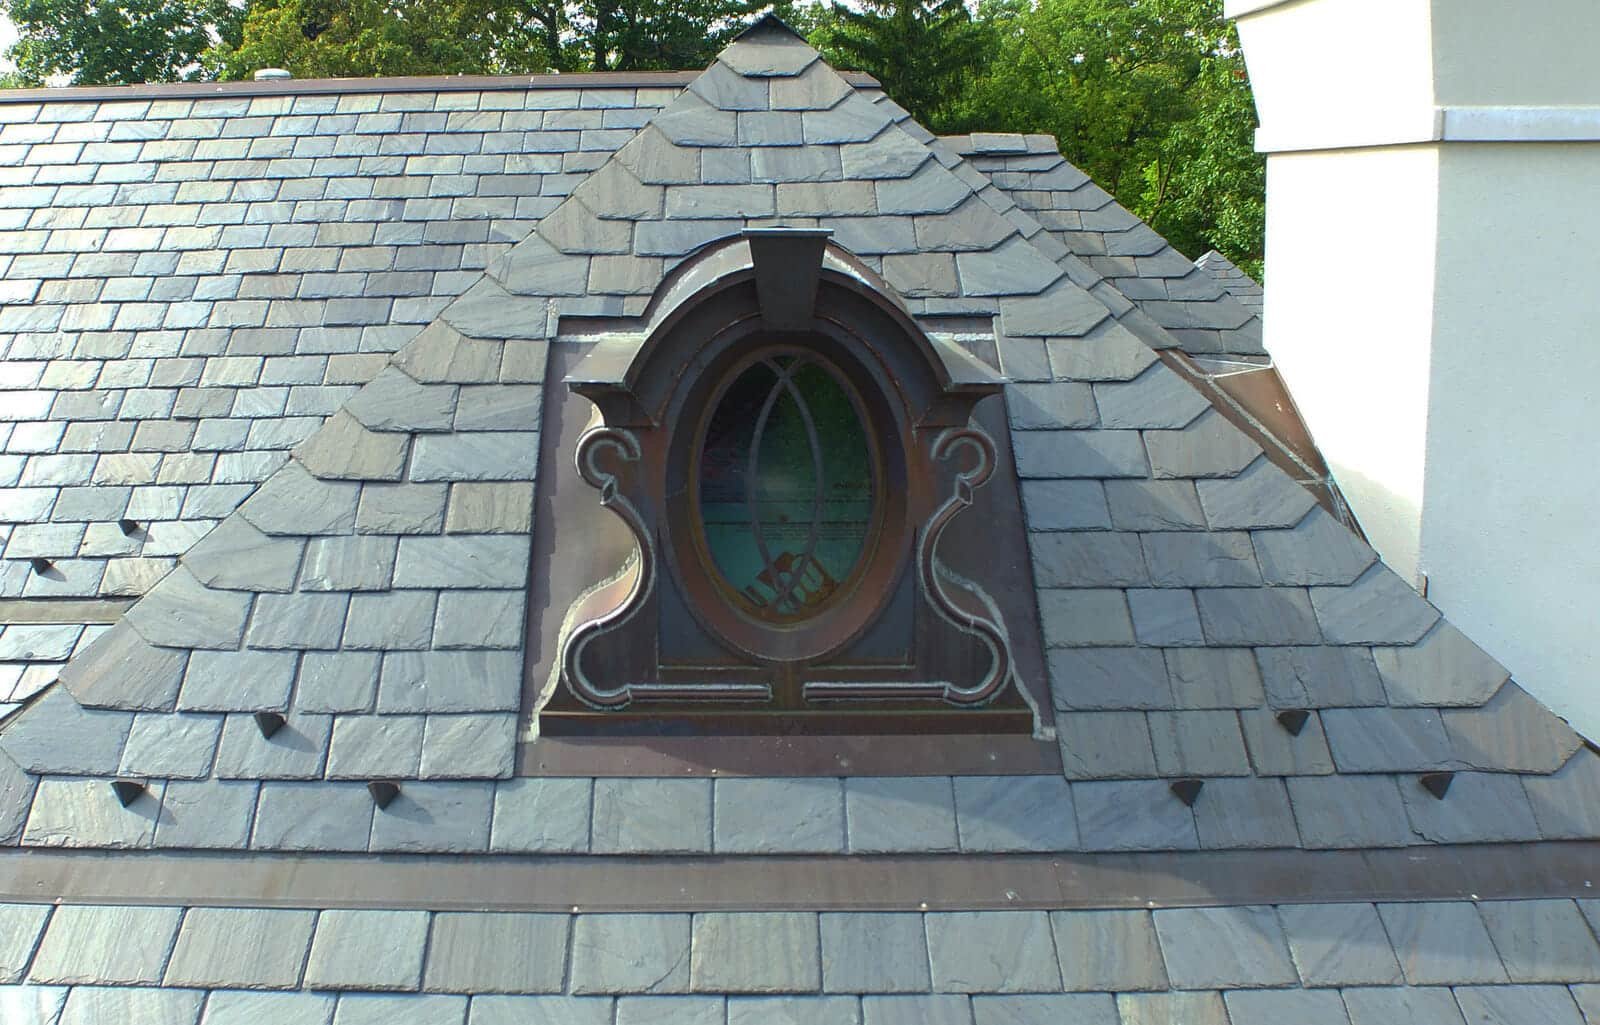 Slate Roofs have many advantages